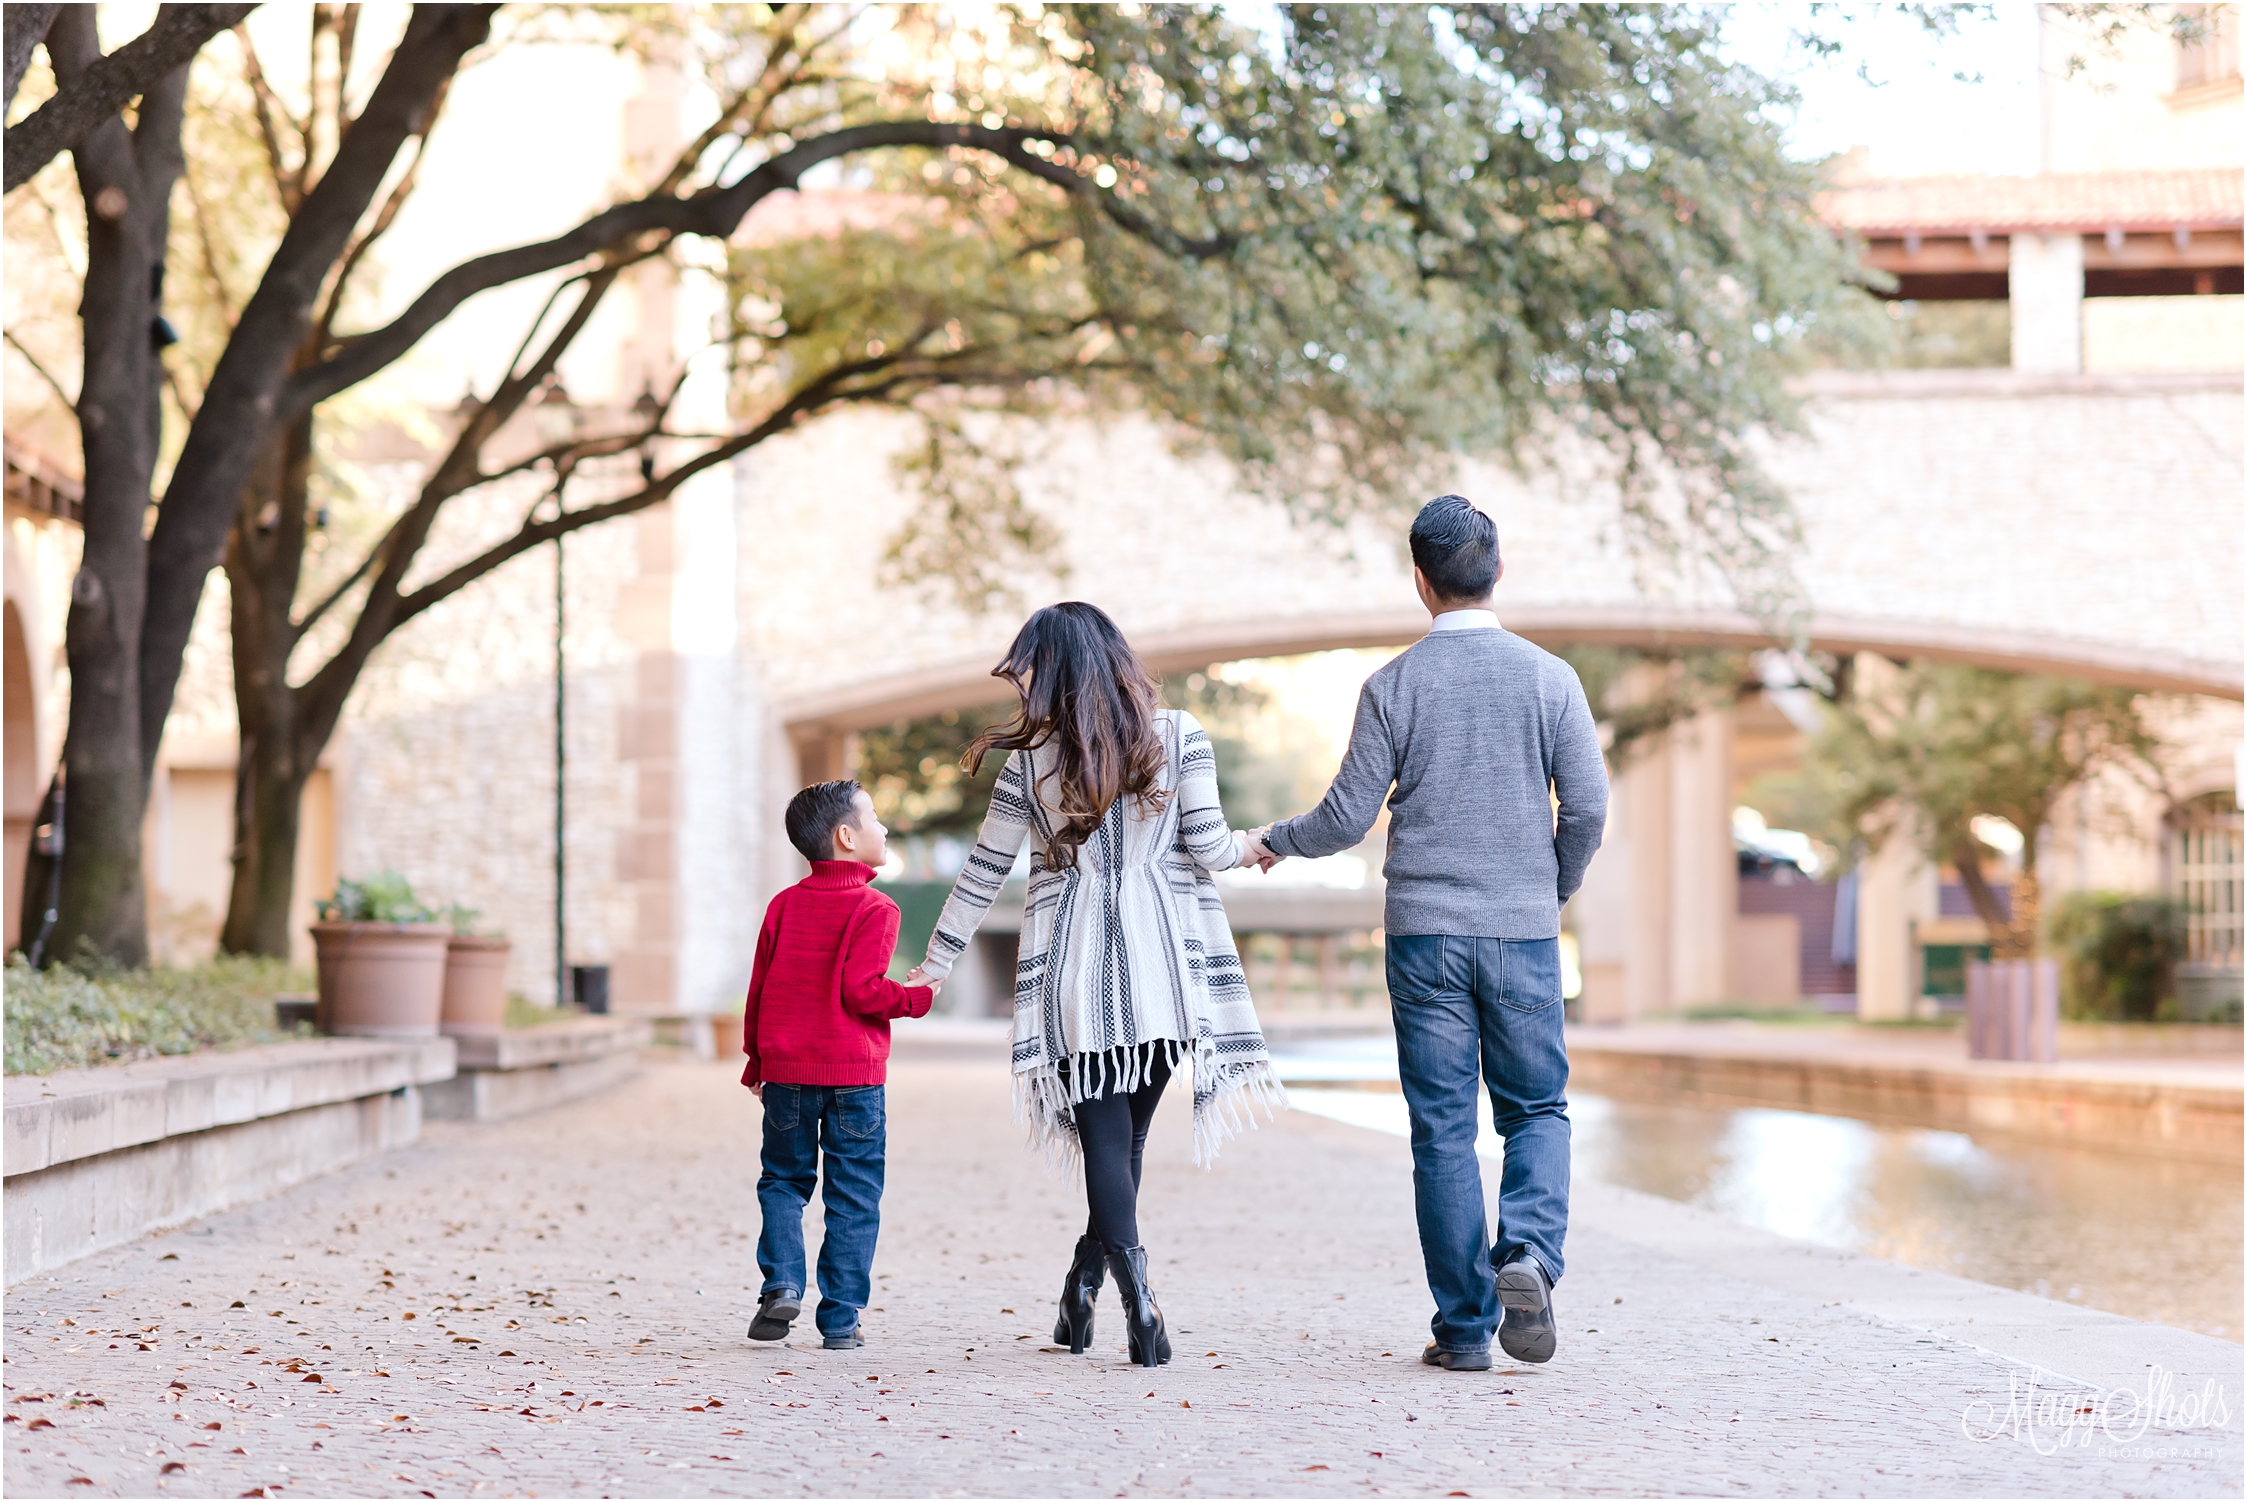 MaggShots Photography, MaggShots, Professional Photography, Professional Photographer, Destination Photography, Family Portraits, Family Session, Love, Las Colinas Canals, Family